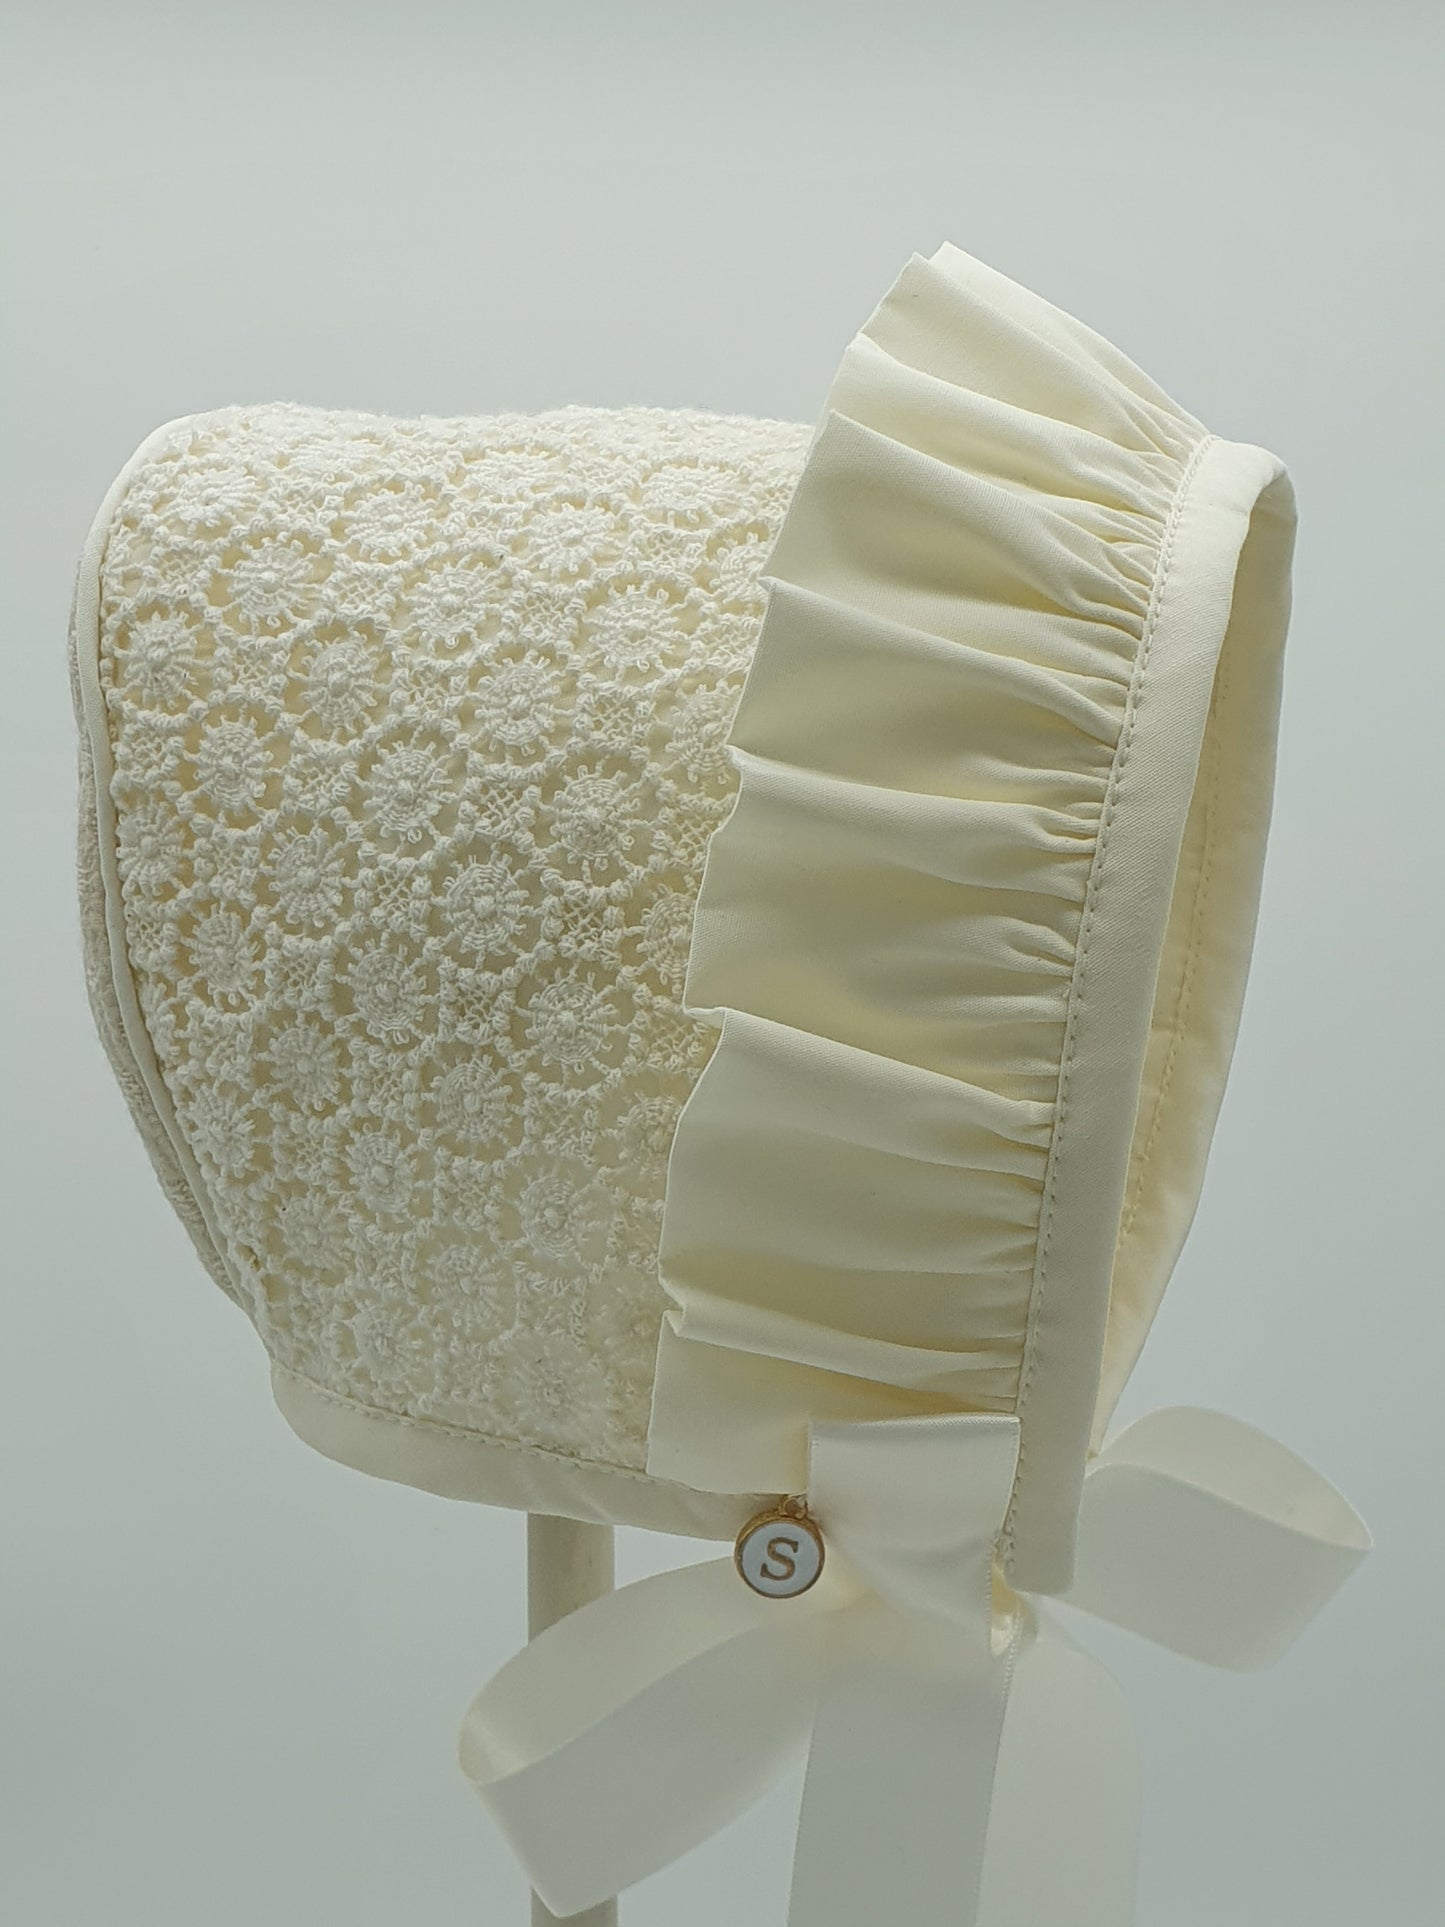 Exclusive Bonnet, Cream Snowflake lace with frill